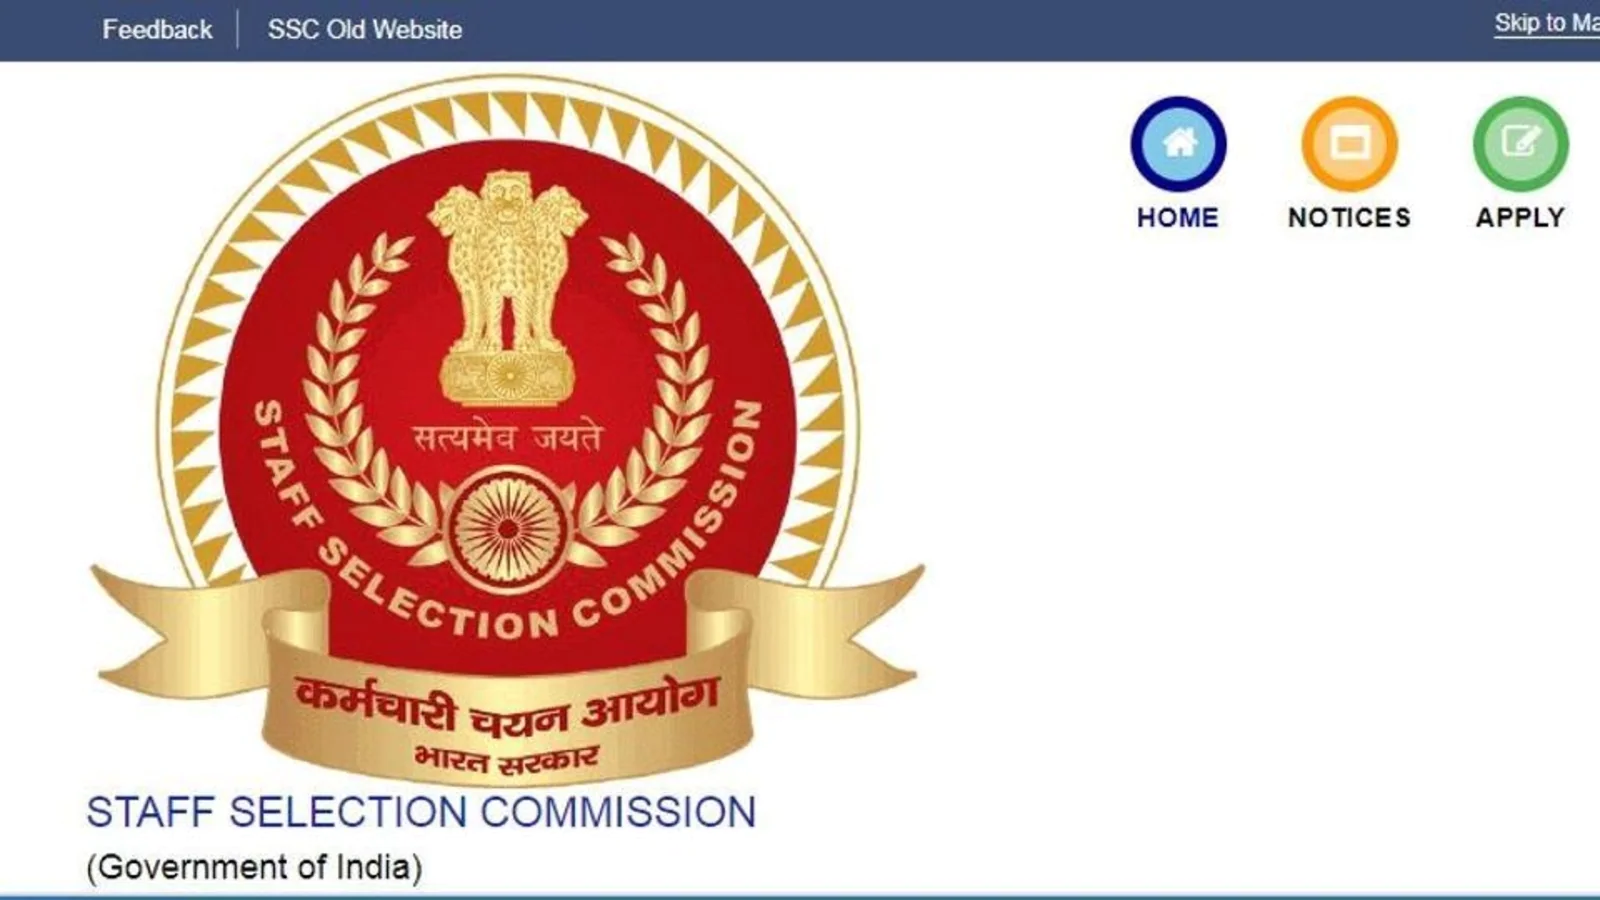 SSC CGL Tier 1 2021 results declared at ssc.nic.in, here's how to check